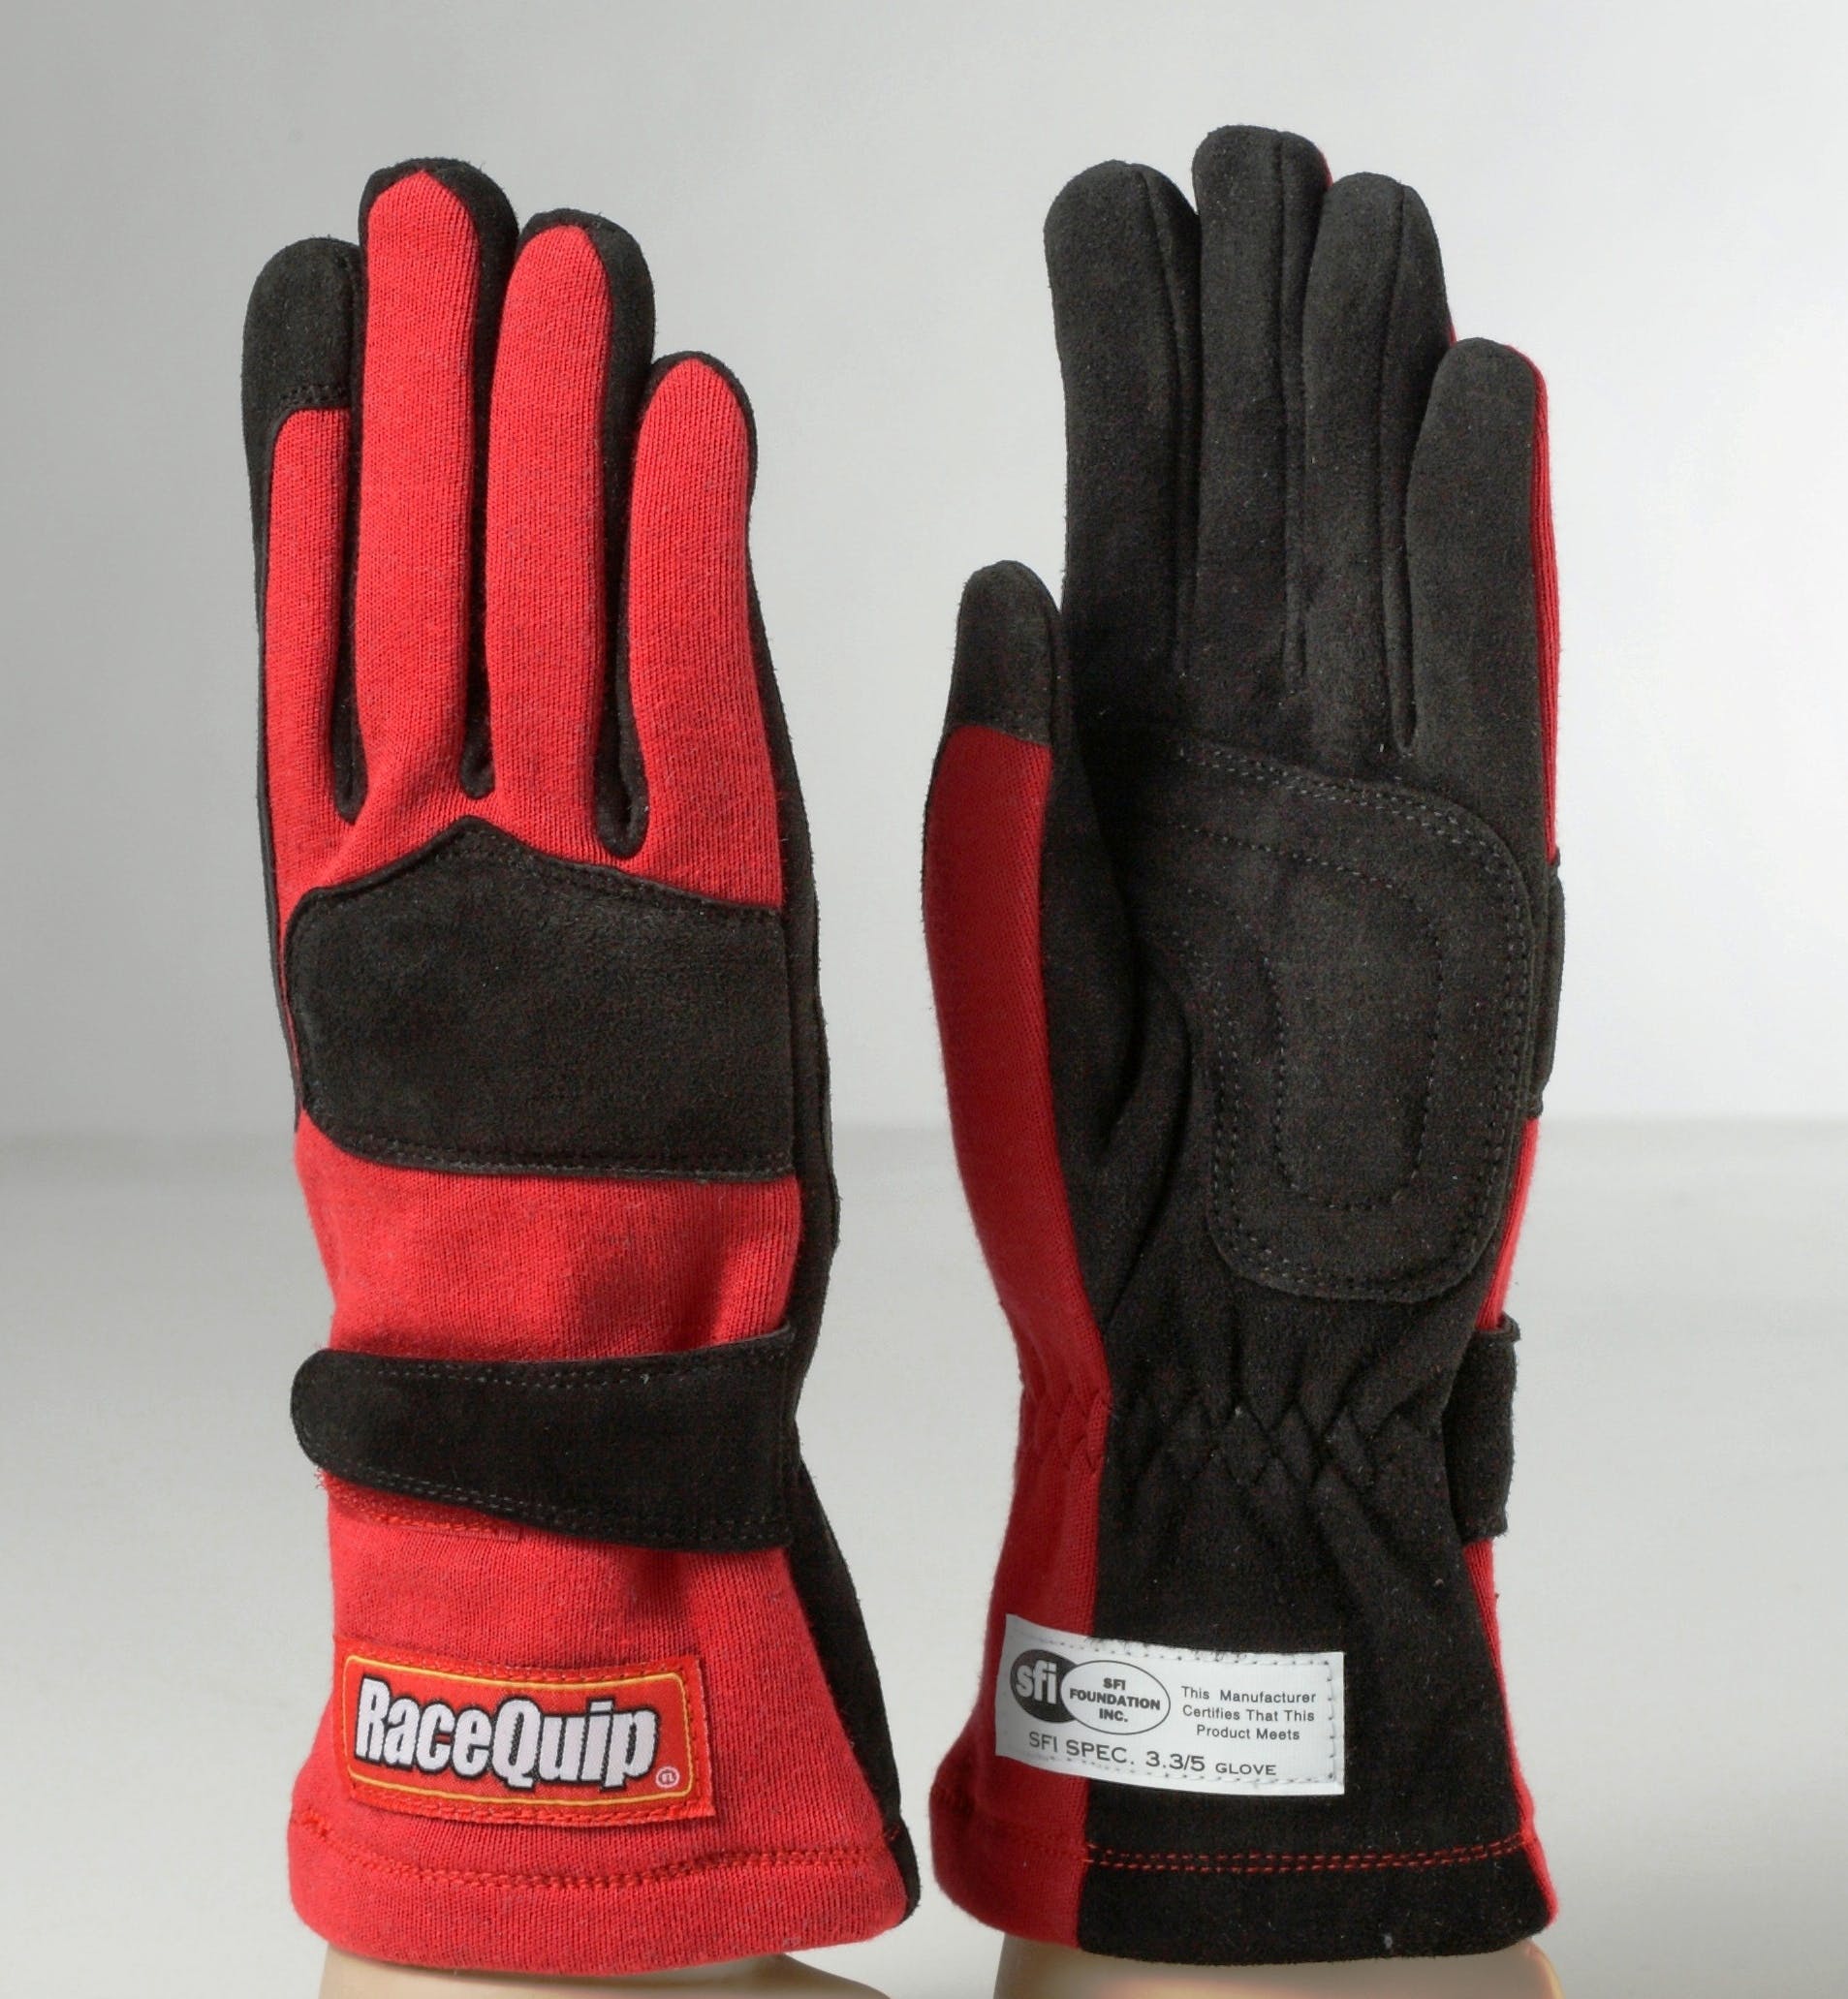 RaceQuip 355015 SFI-5 Double-Layer Racing Gloves (Red, Large)